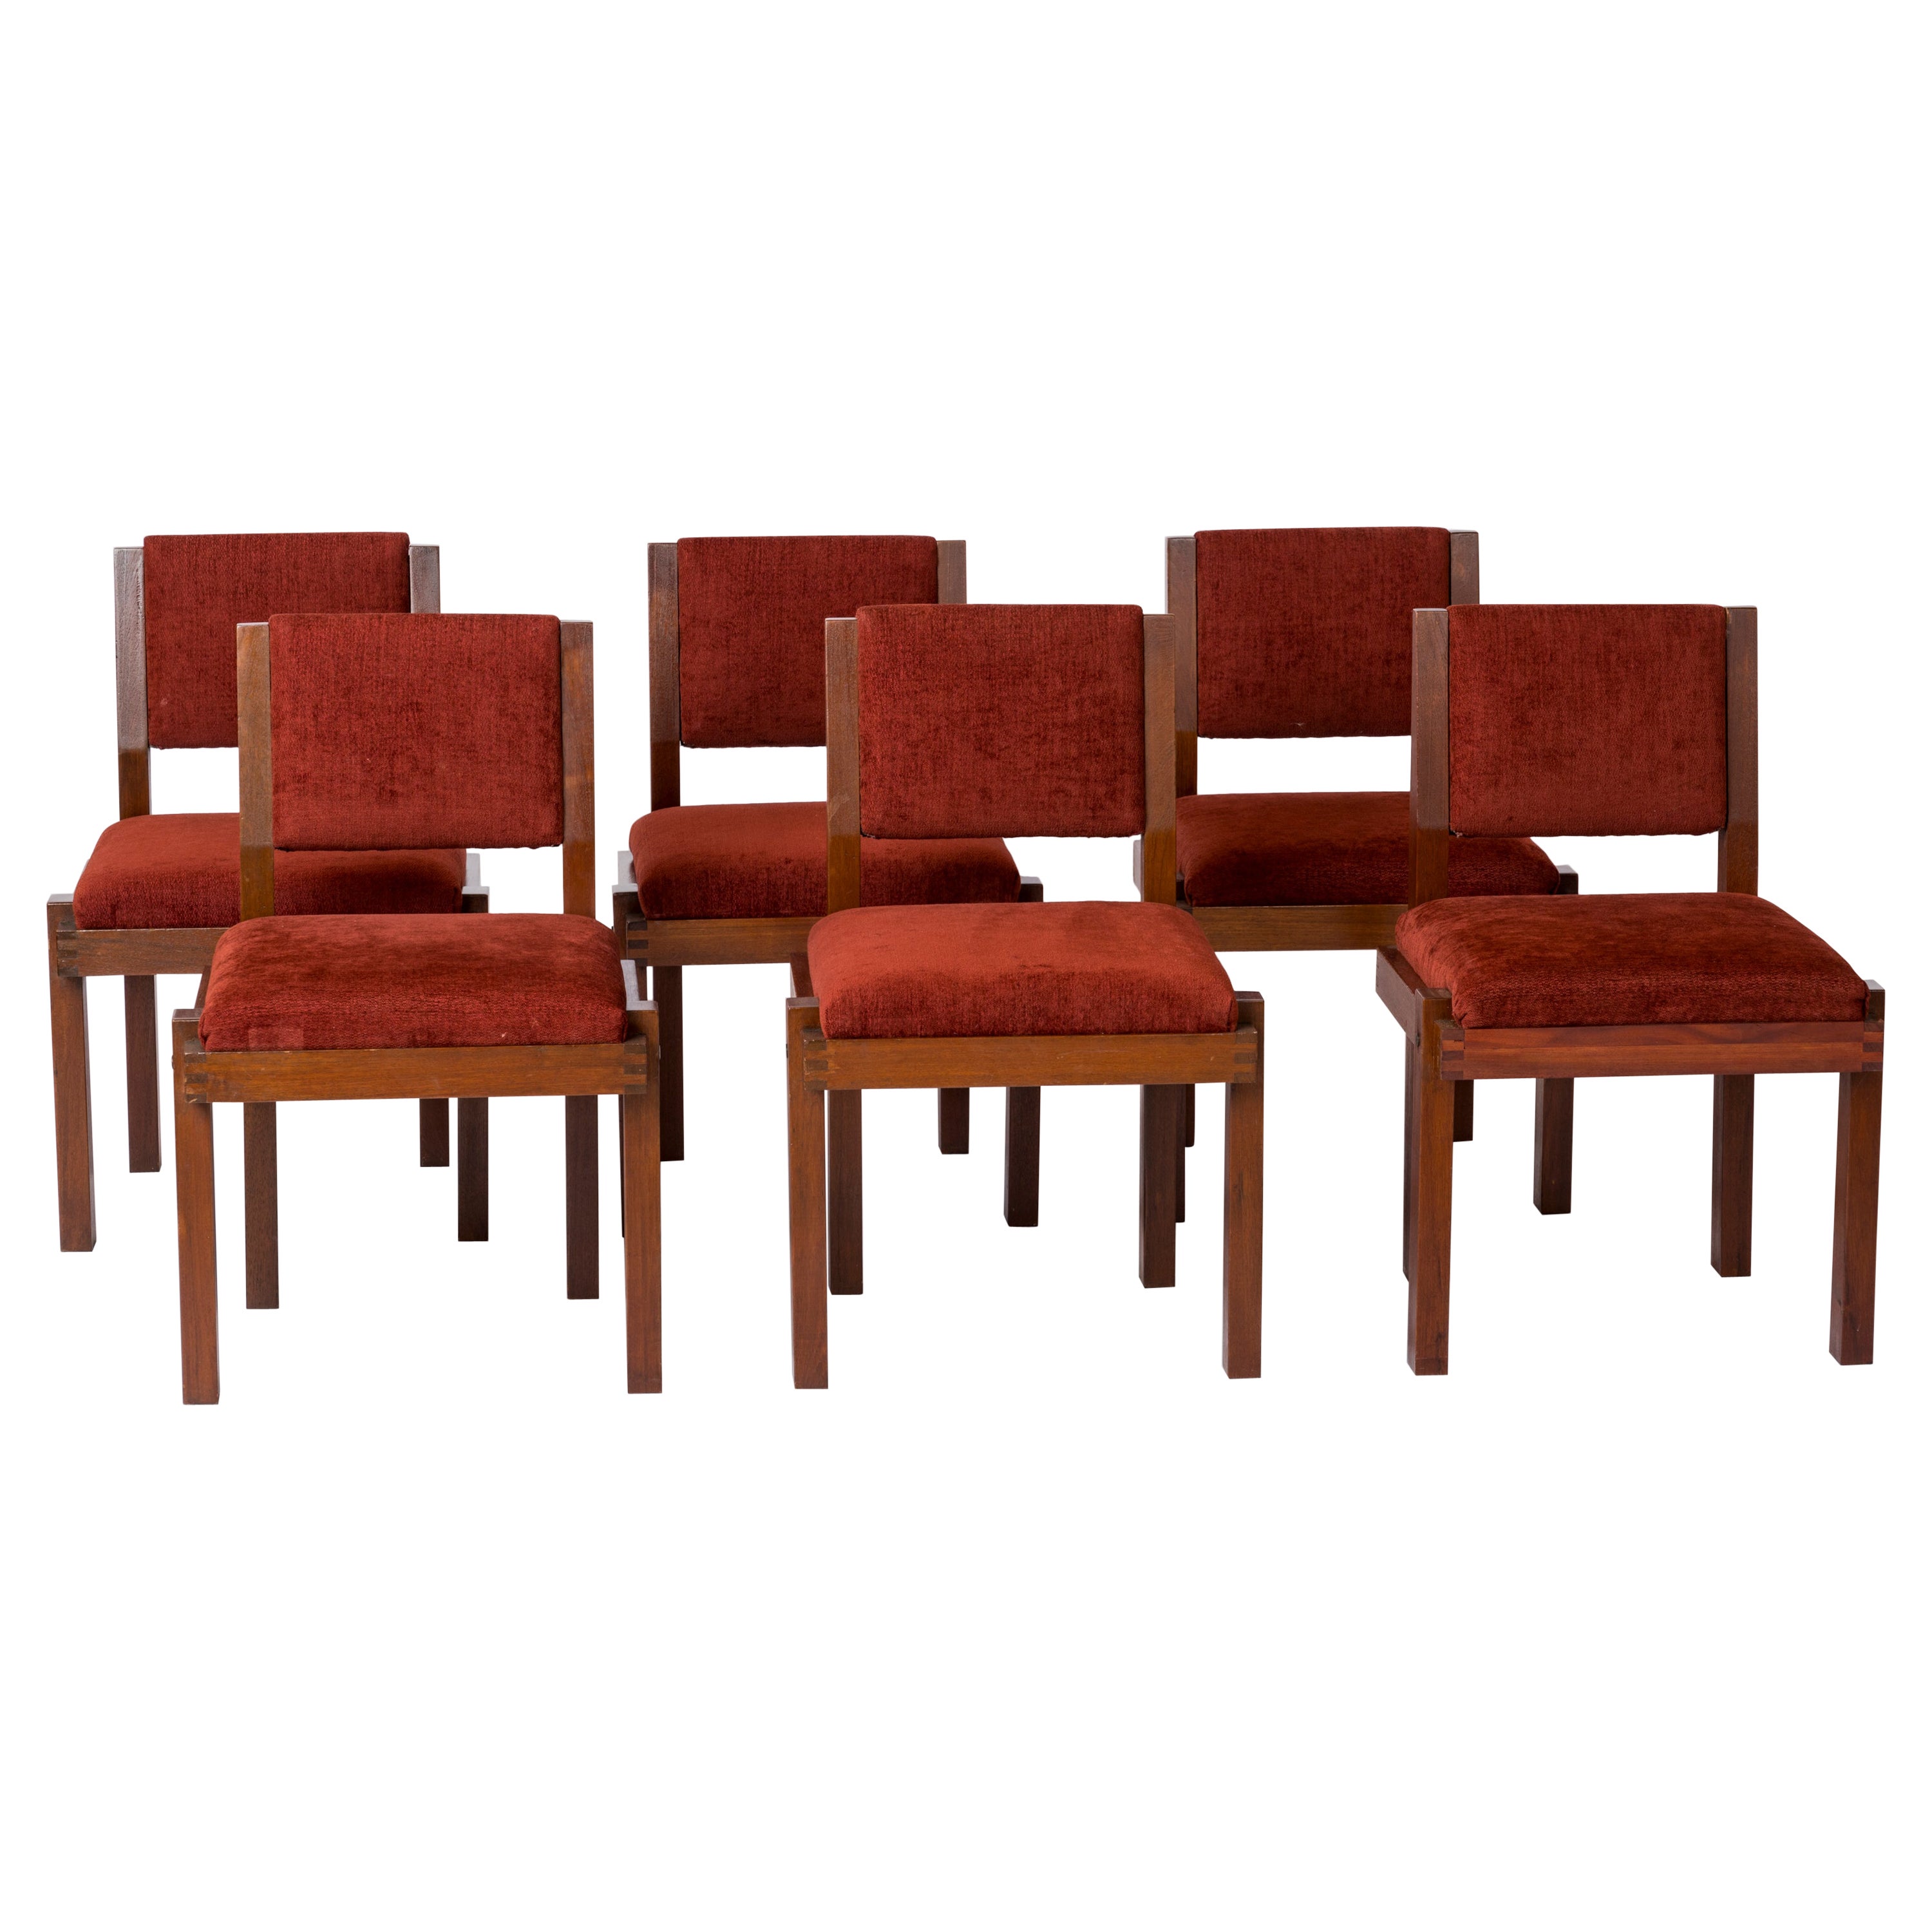 Six Modernist Solid Mahogany and Bordeaux Upholstery Chairs - France 1970's For Sale